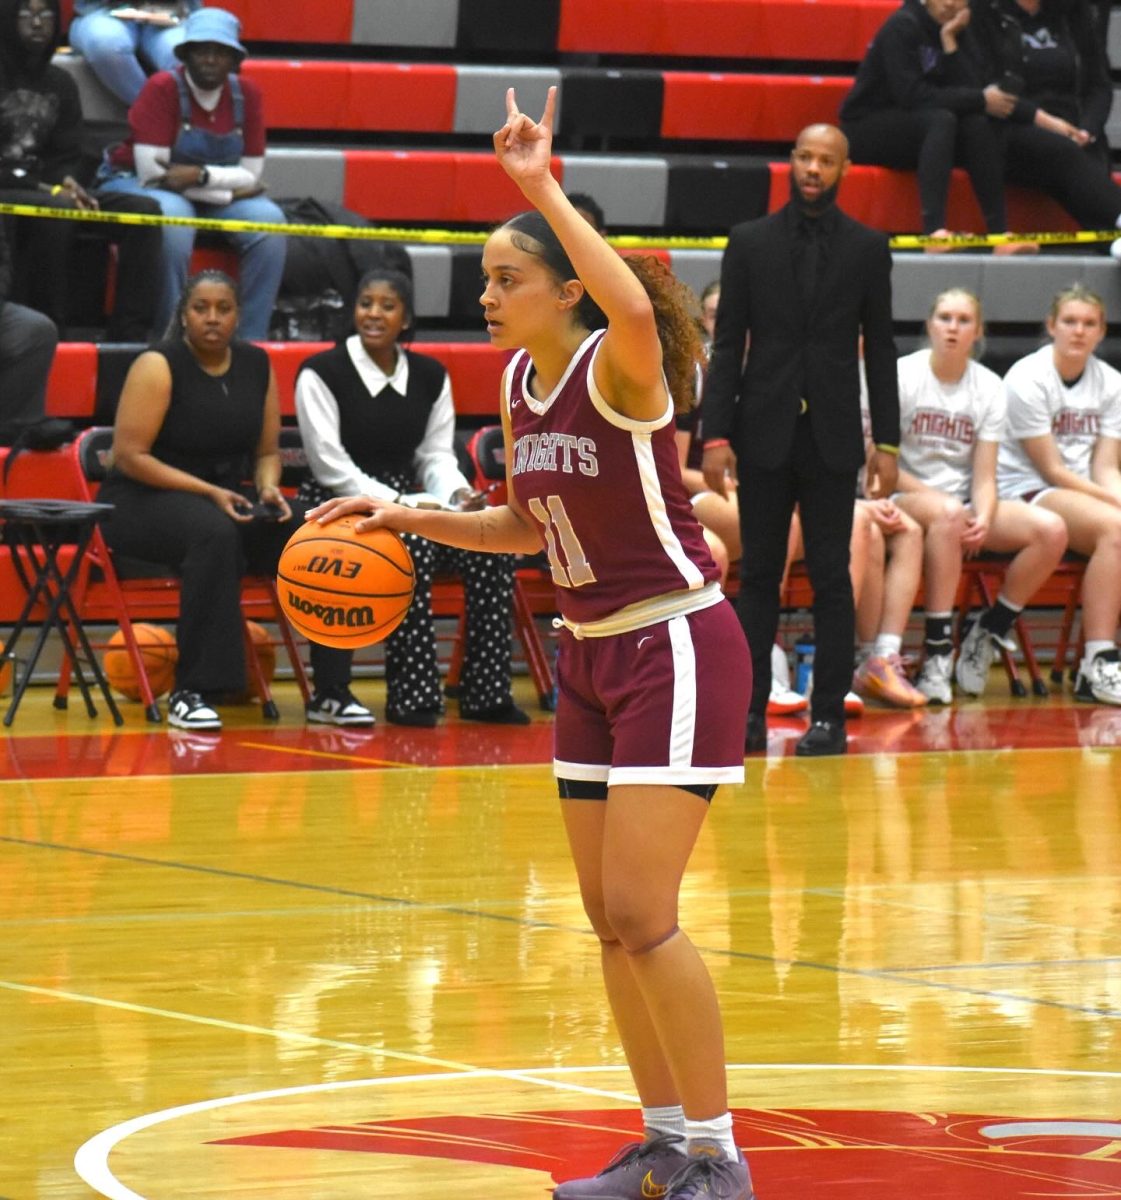 Senior guard Briaiah Lewis calls a play in the region championship game against Maynard-Jackson on Feb. 17. The Knights lost 56-44 and ended up second place in the region.